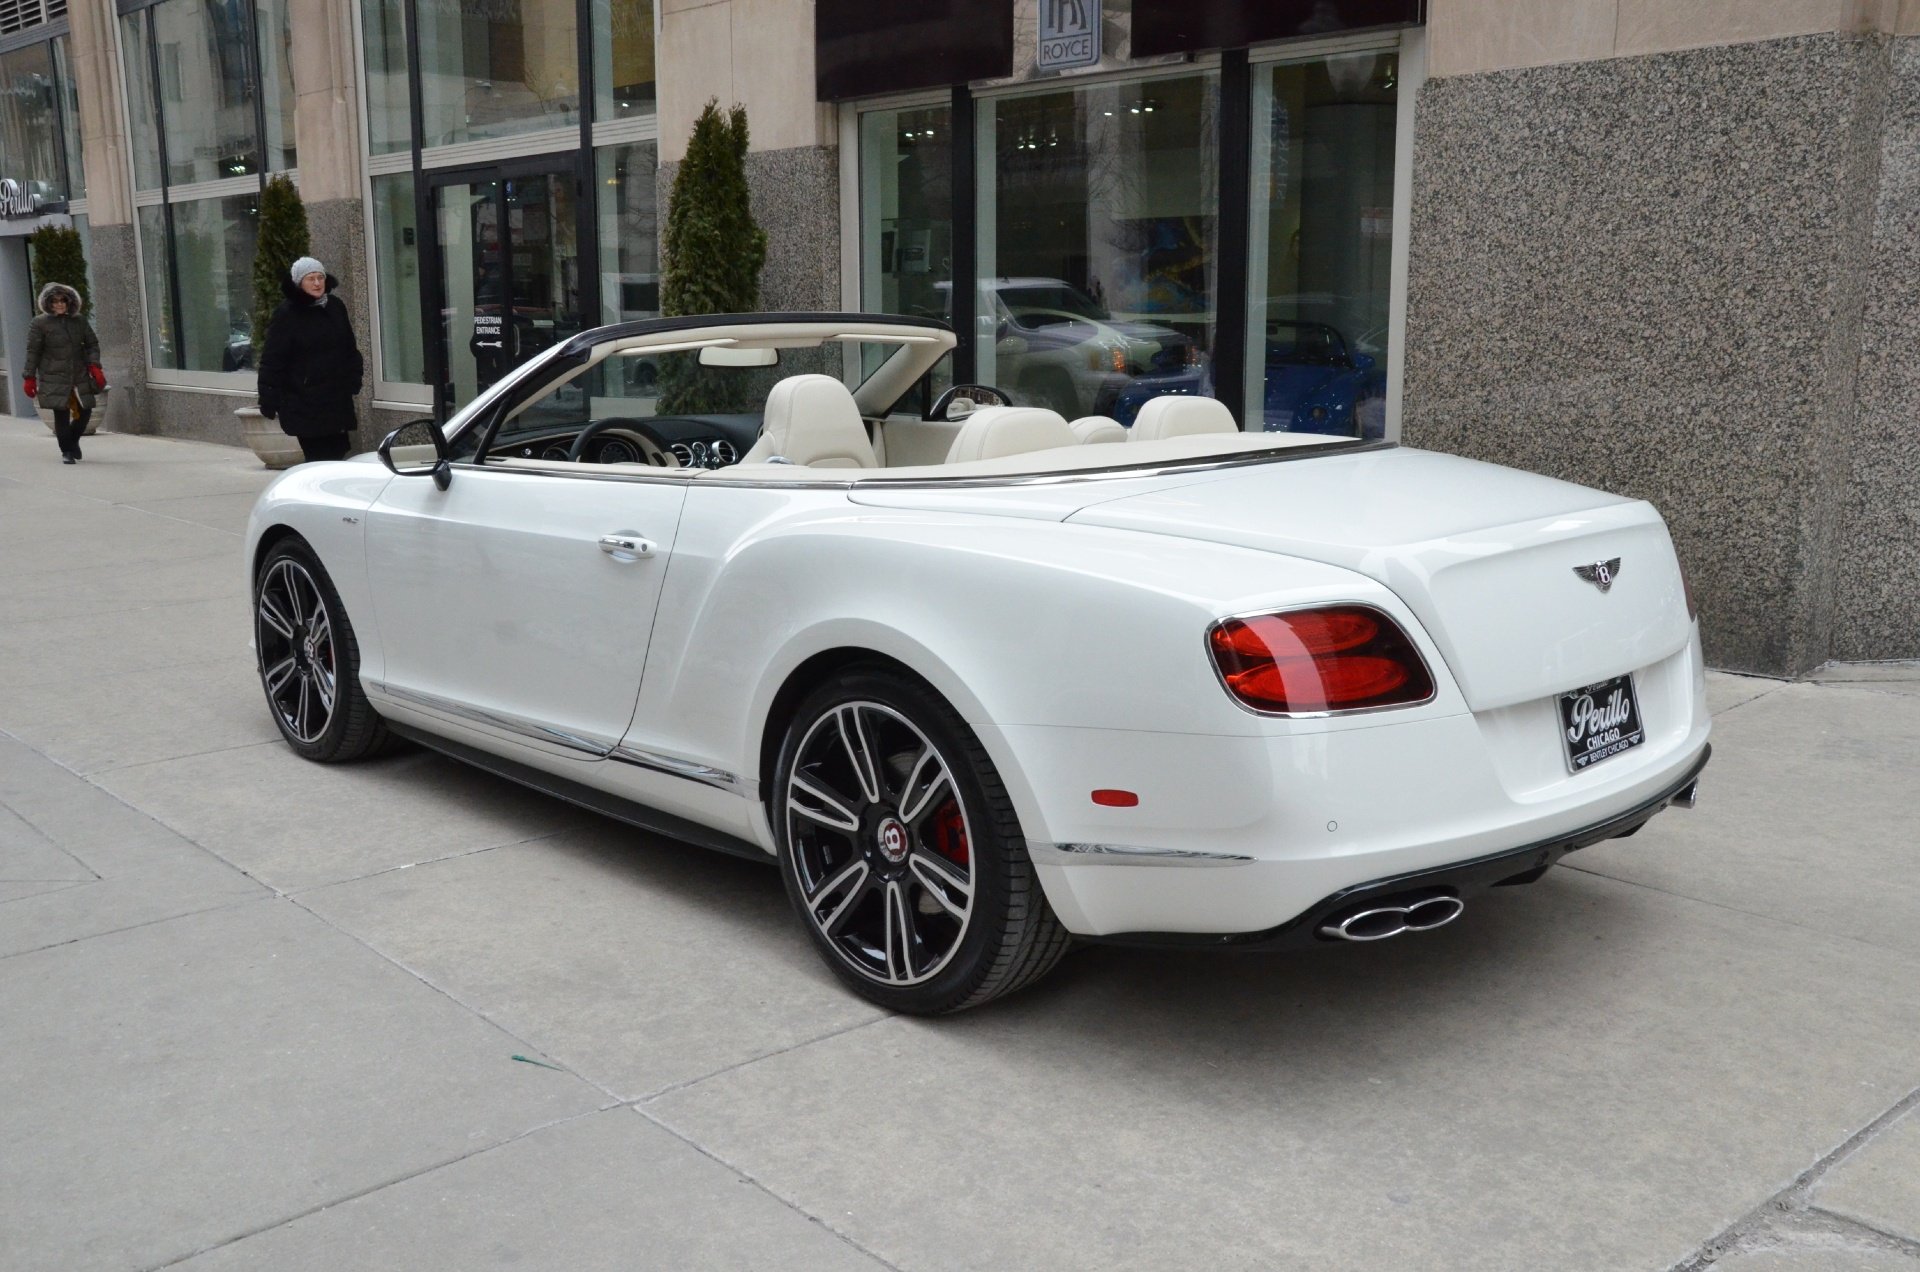 2015, Bentley, Continental, Gtc, V8 s, Cars, White Wallpaper